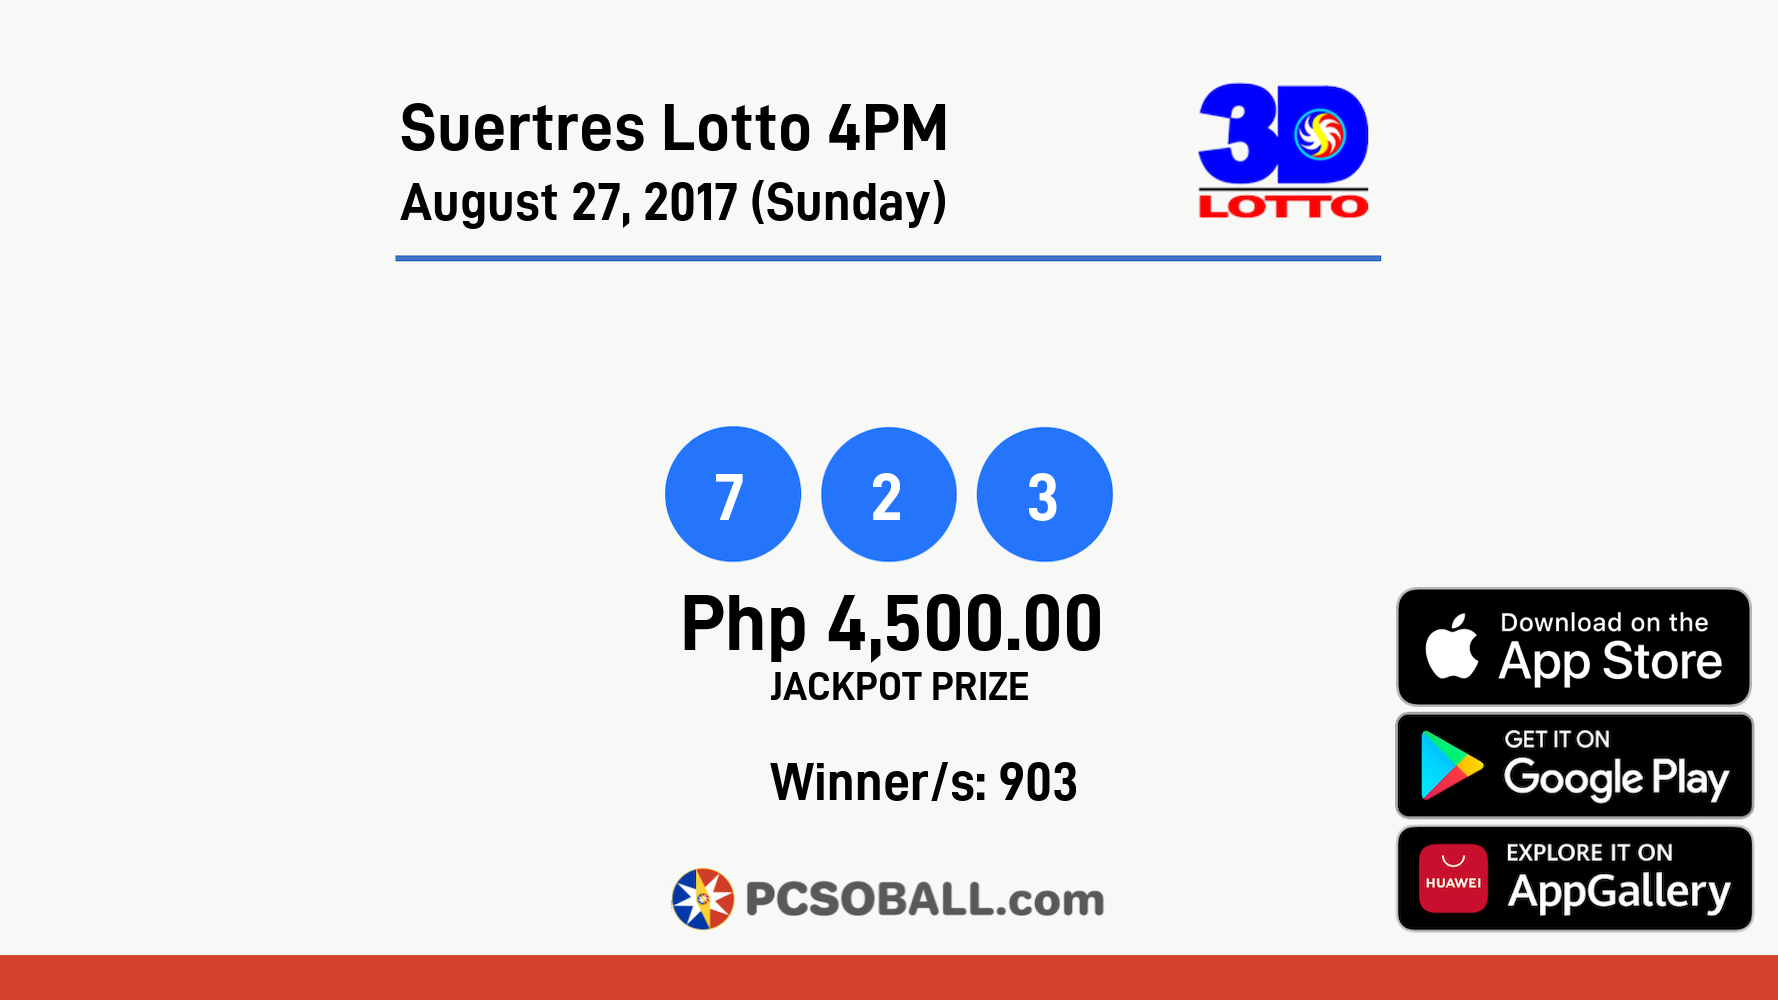 Suertres Lotto 4PM August 27, 2017 (Sunday) Result